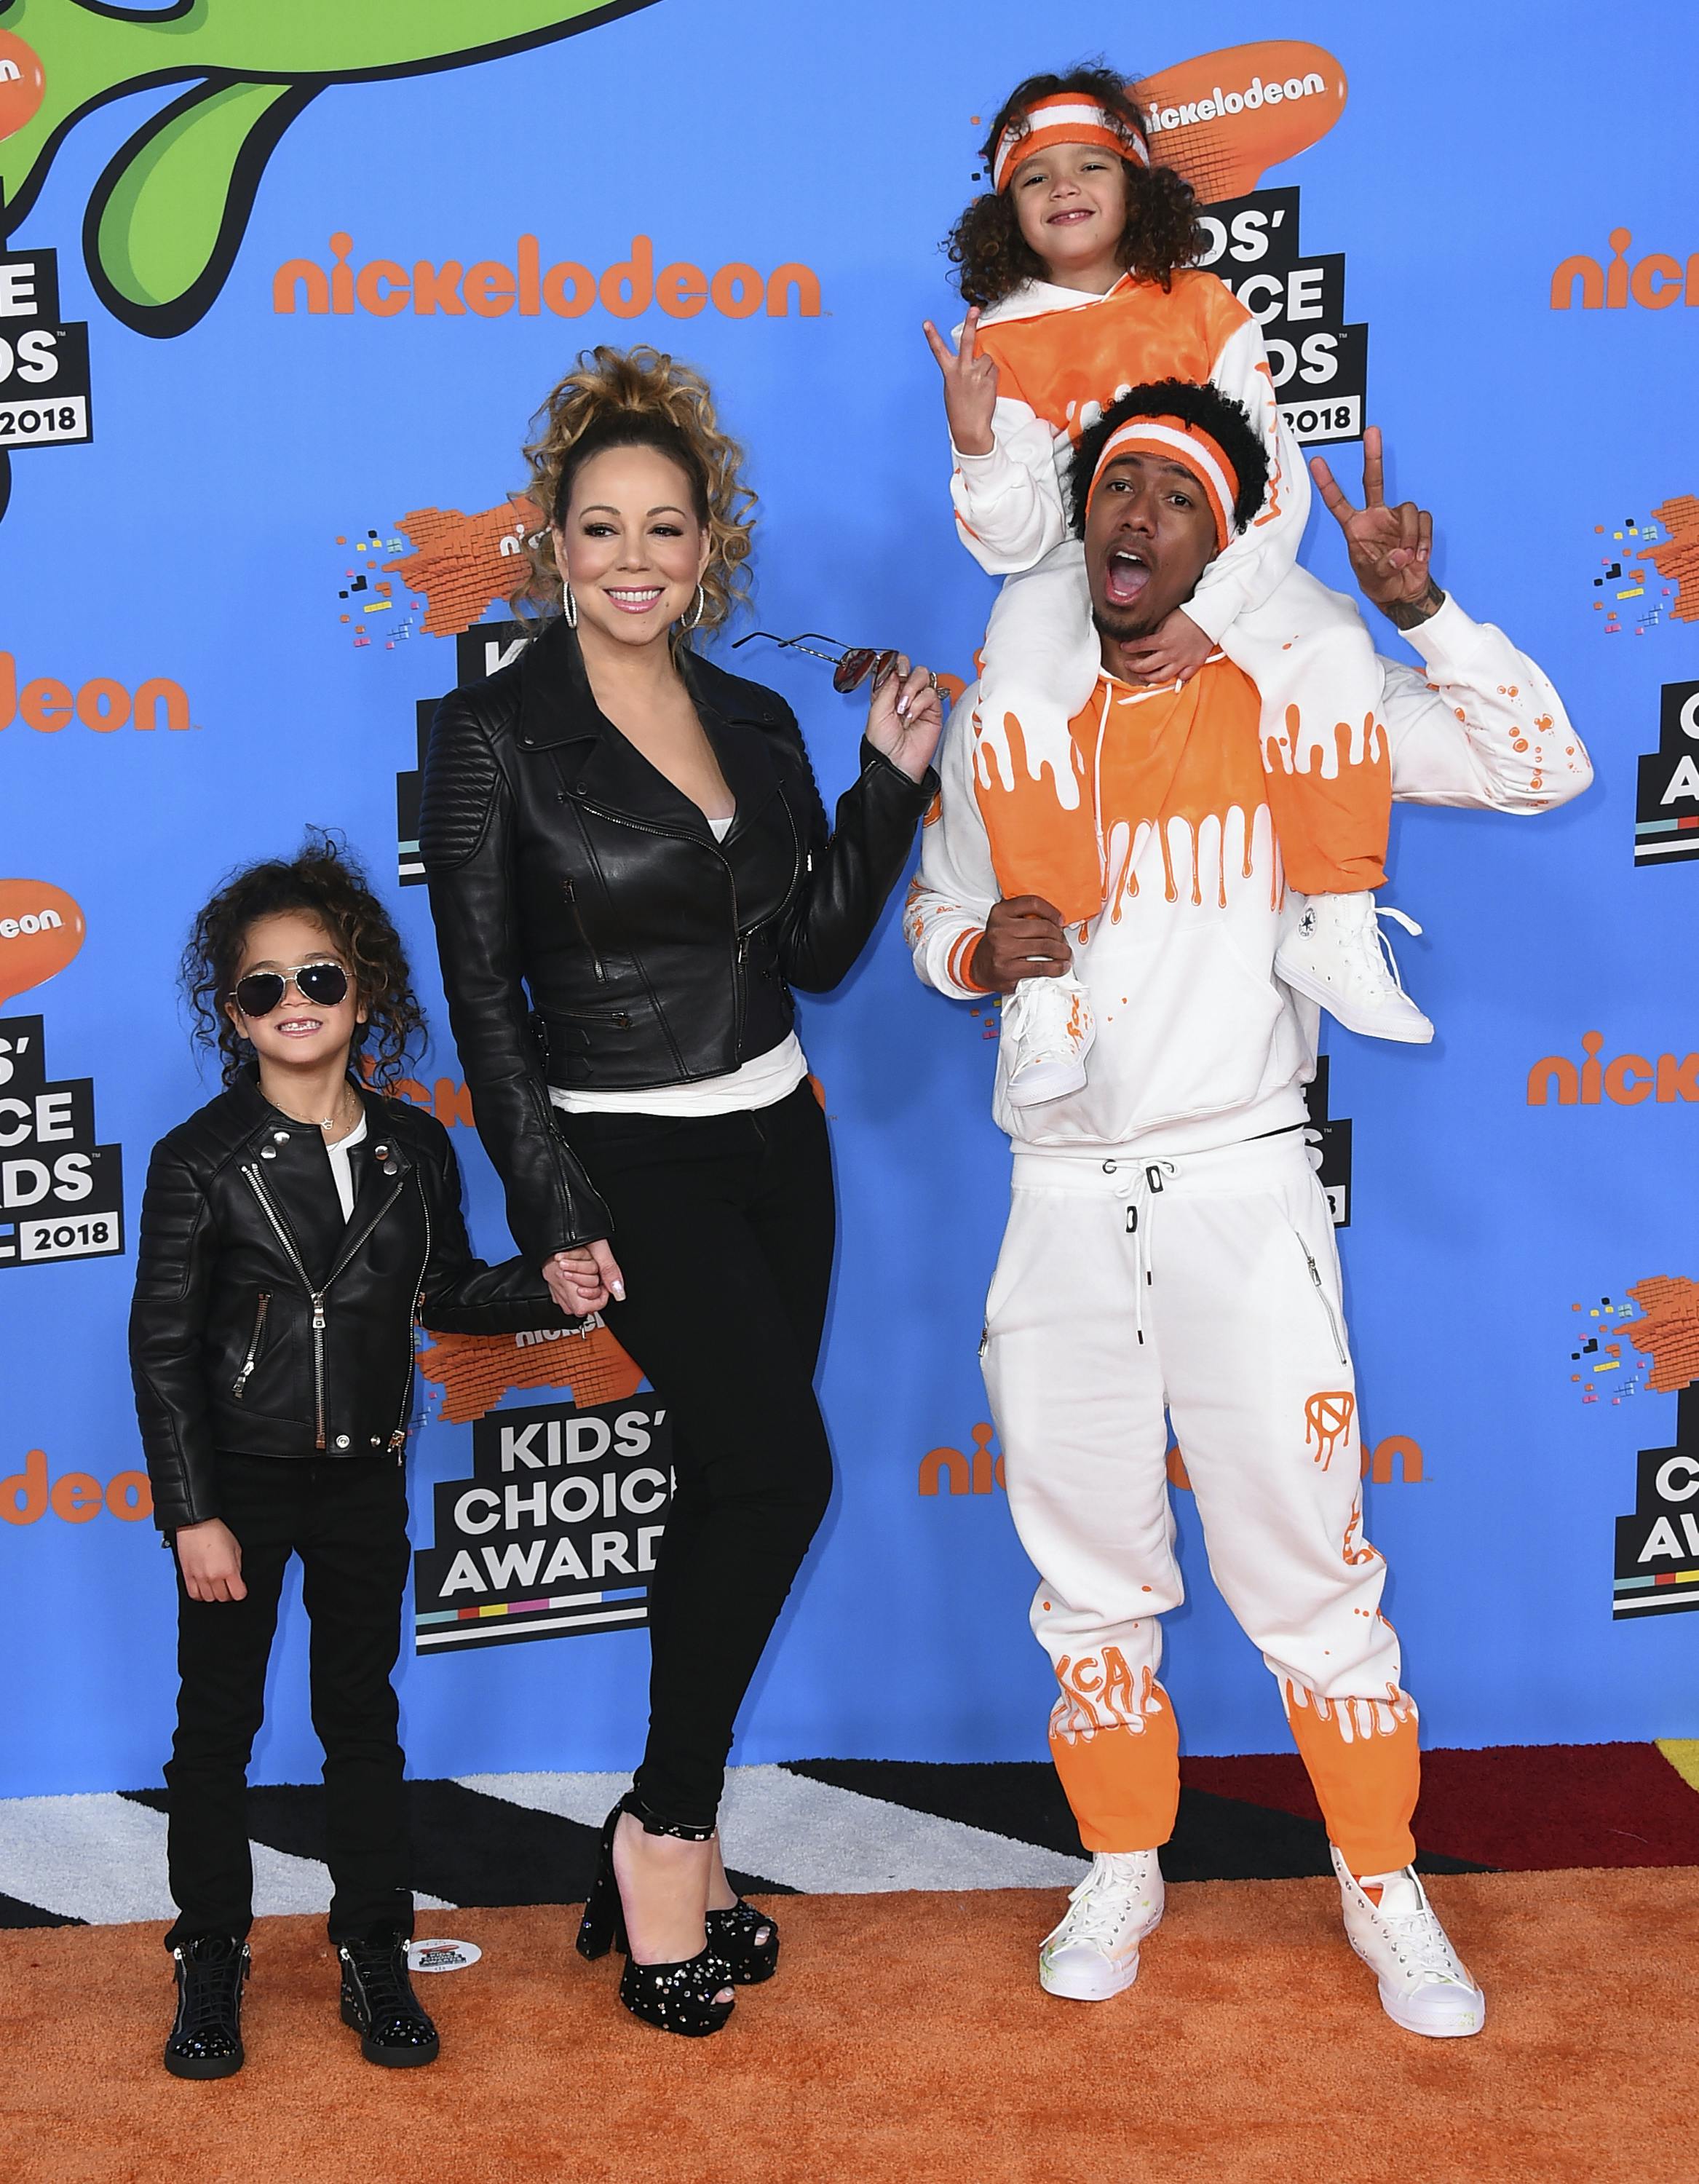 Mariah Carey, center left, Nick Cannon, center right, and from left, their children Monroe and Moroccan arrive at the Kids' Choice Awards at The Forum on Saturday, March 24, 2018, in Inglewood, Calif. (Photo by Jordan Strauss/Invision/AP)